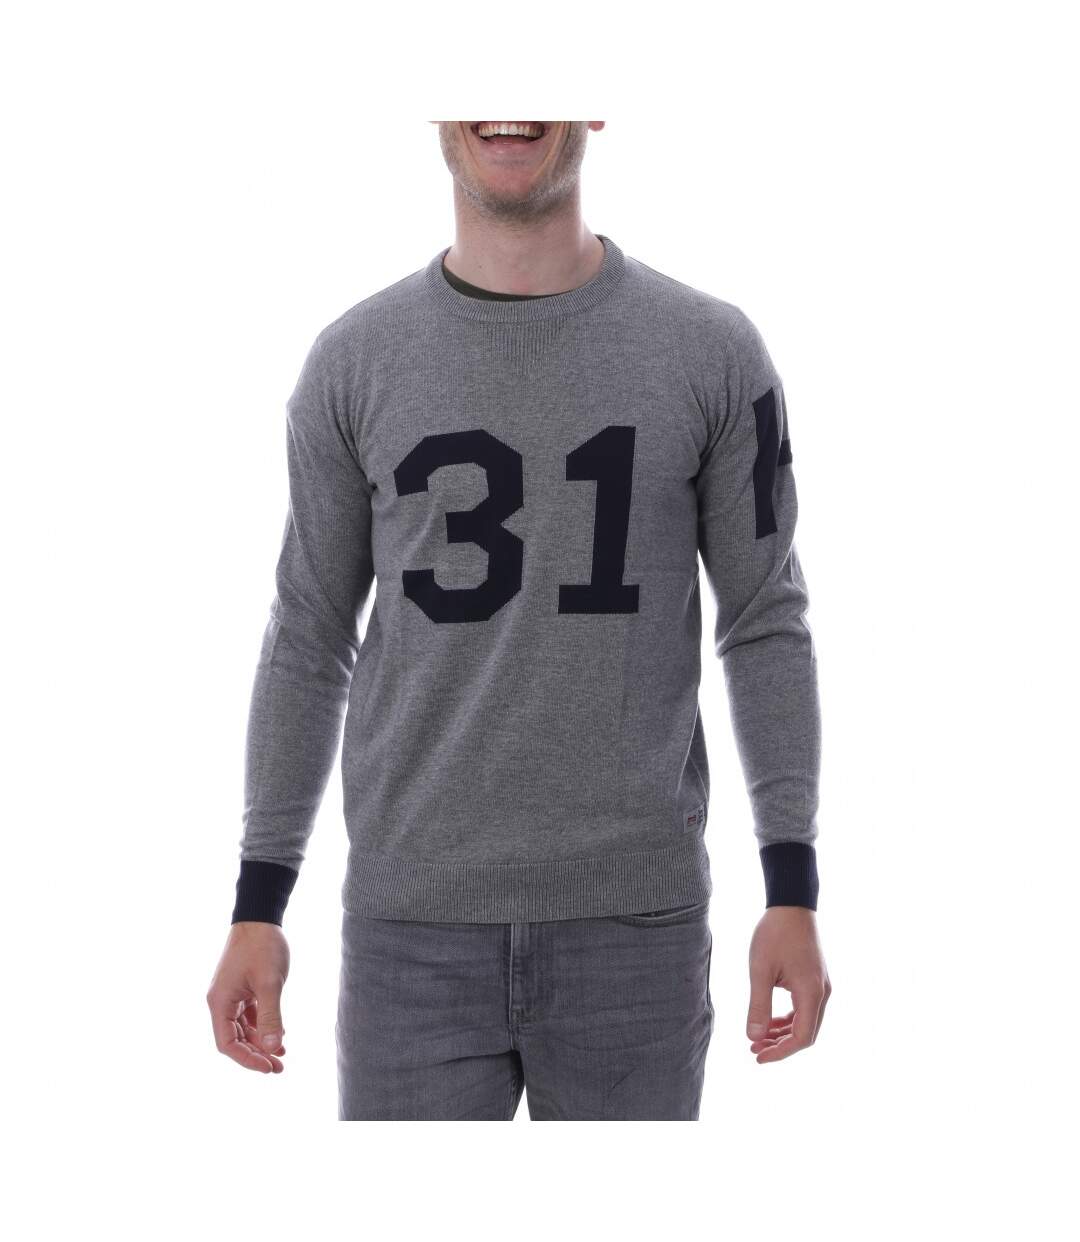 Pull Over Gris Homme Hungaria R neck edition